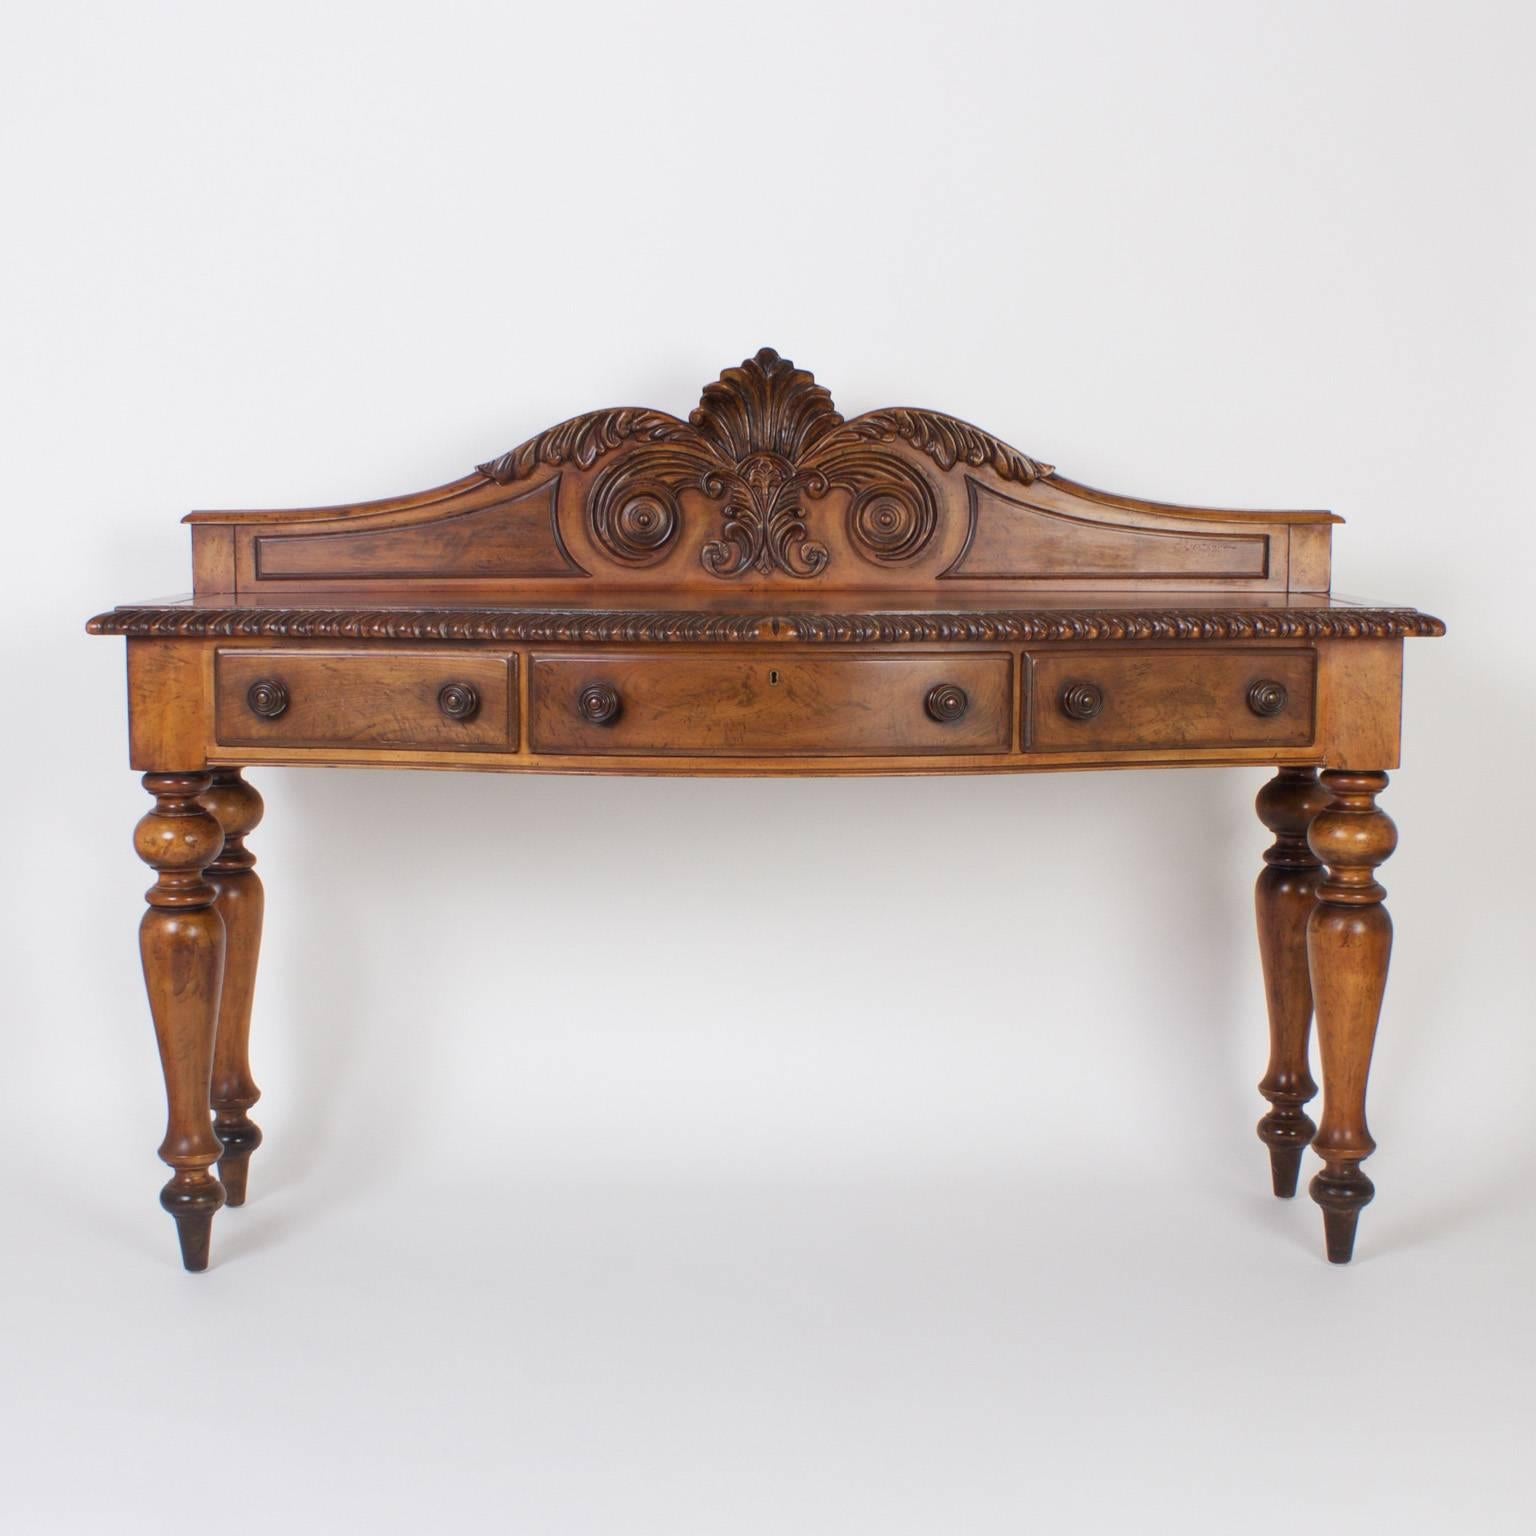 Impressive, British colonial style sideboard or server with an inspired bold presence. Expertly crafted in walnut and featuring an elaborately carved gallery and a bow front case with three drawers set on Classic turned legs. Reminiscent of West